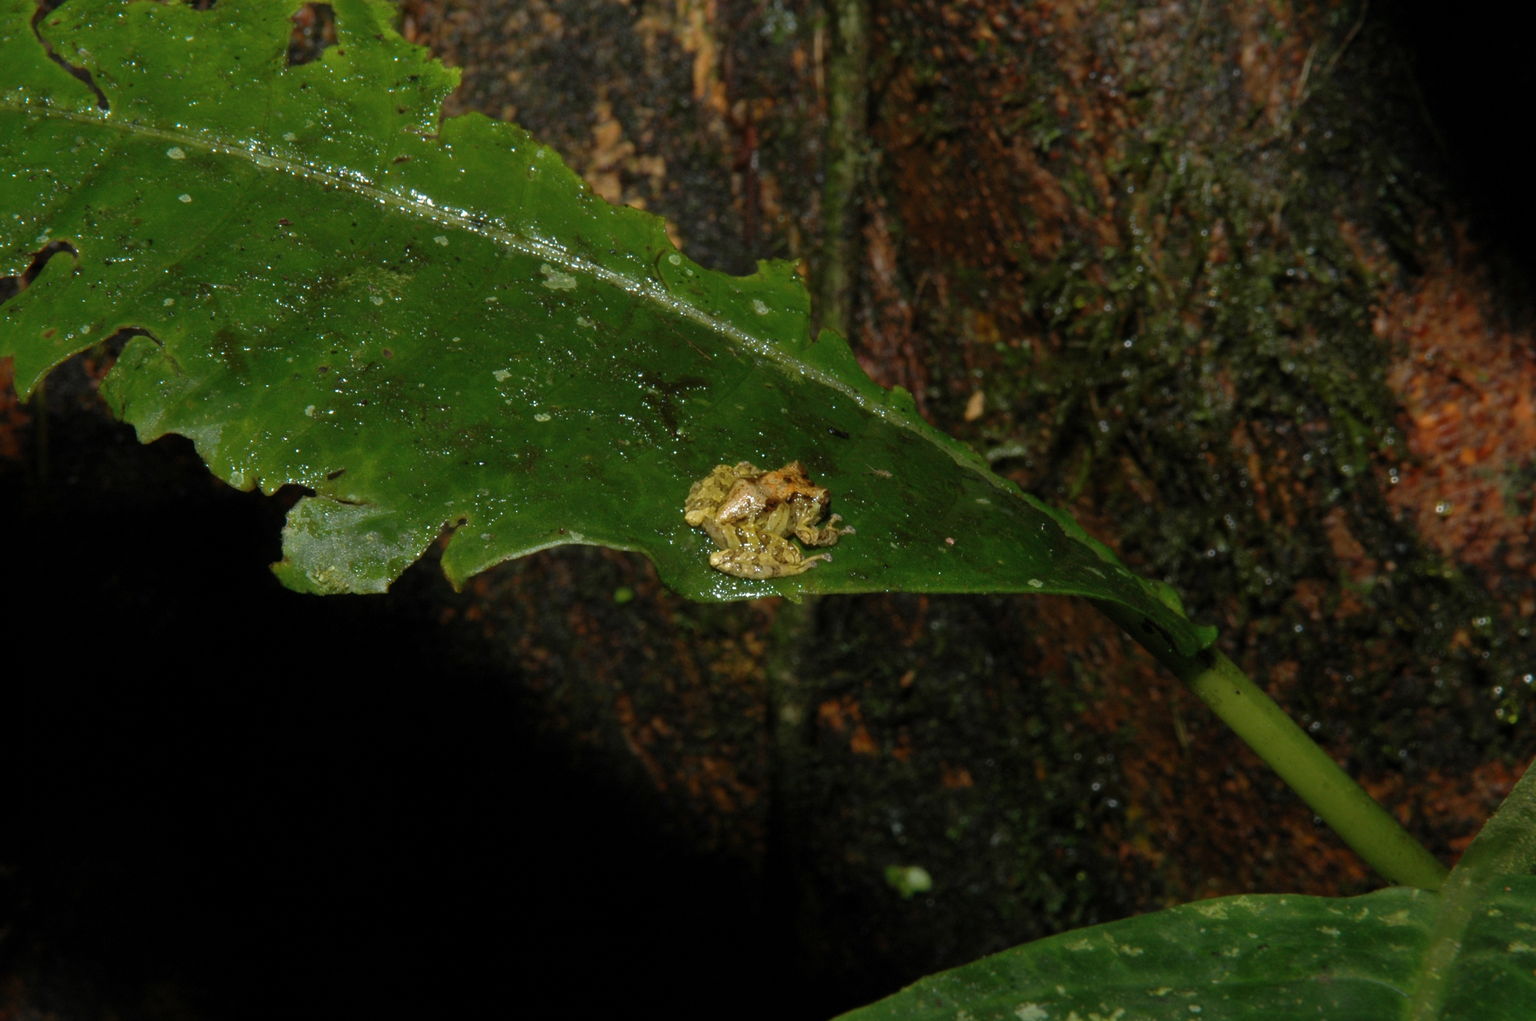 A wee frog in the cloud forest.